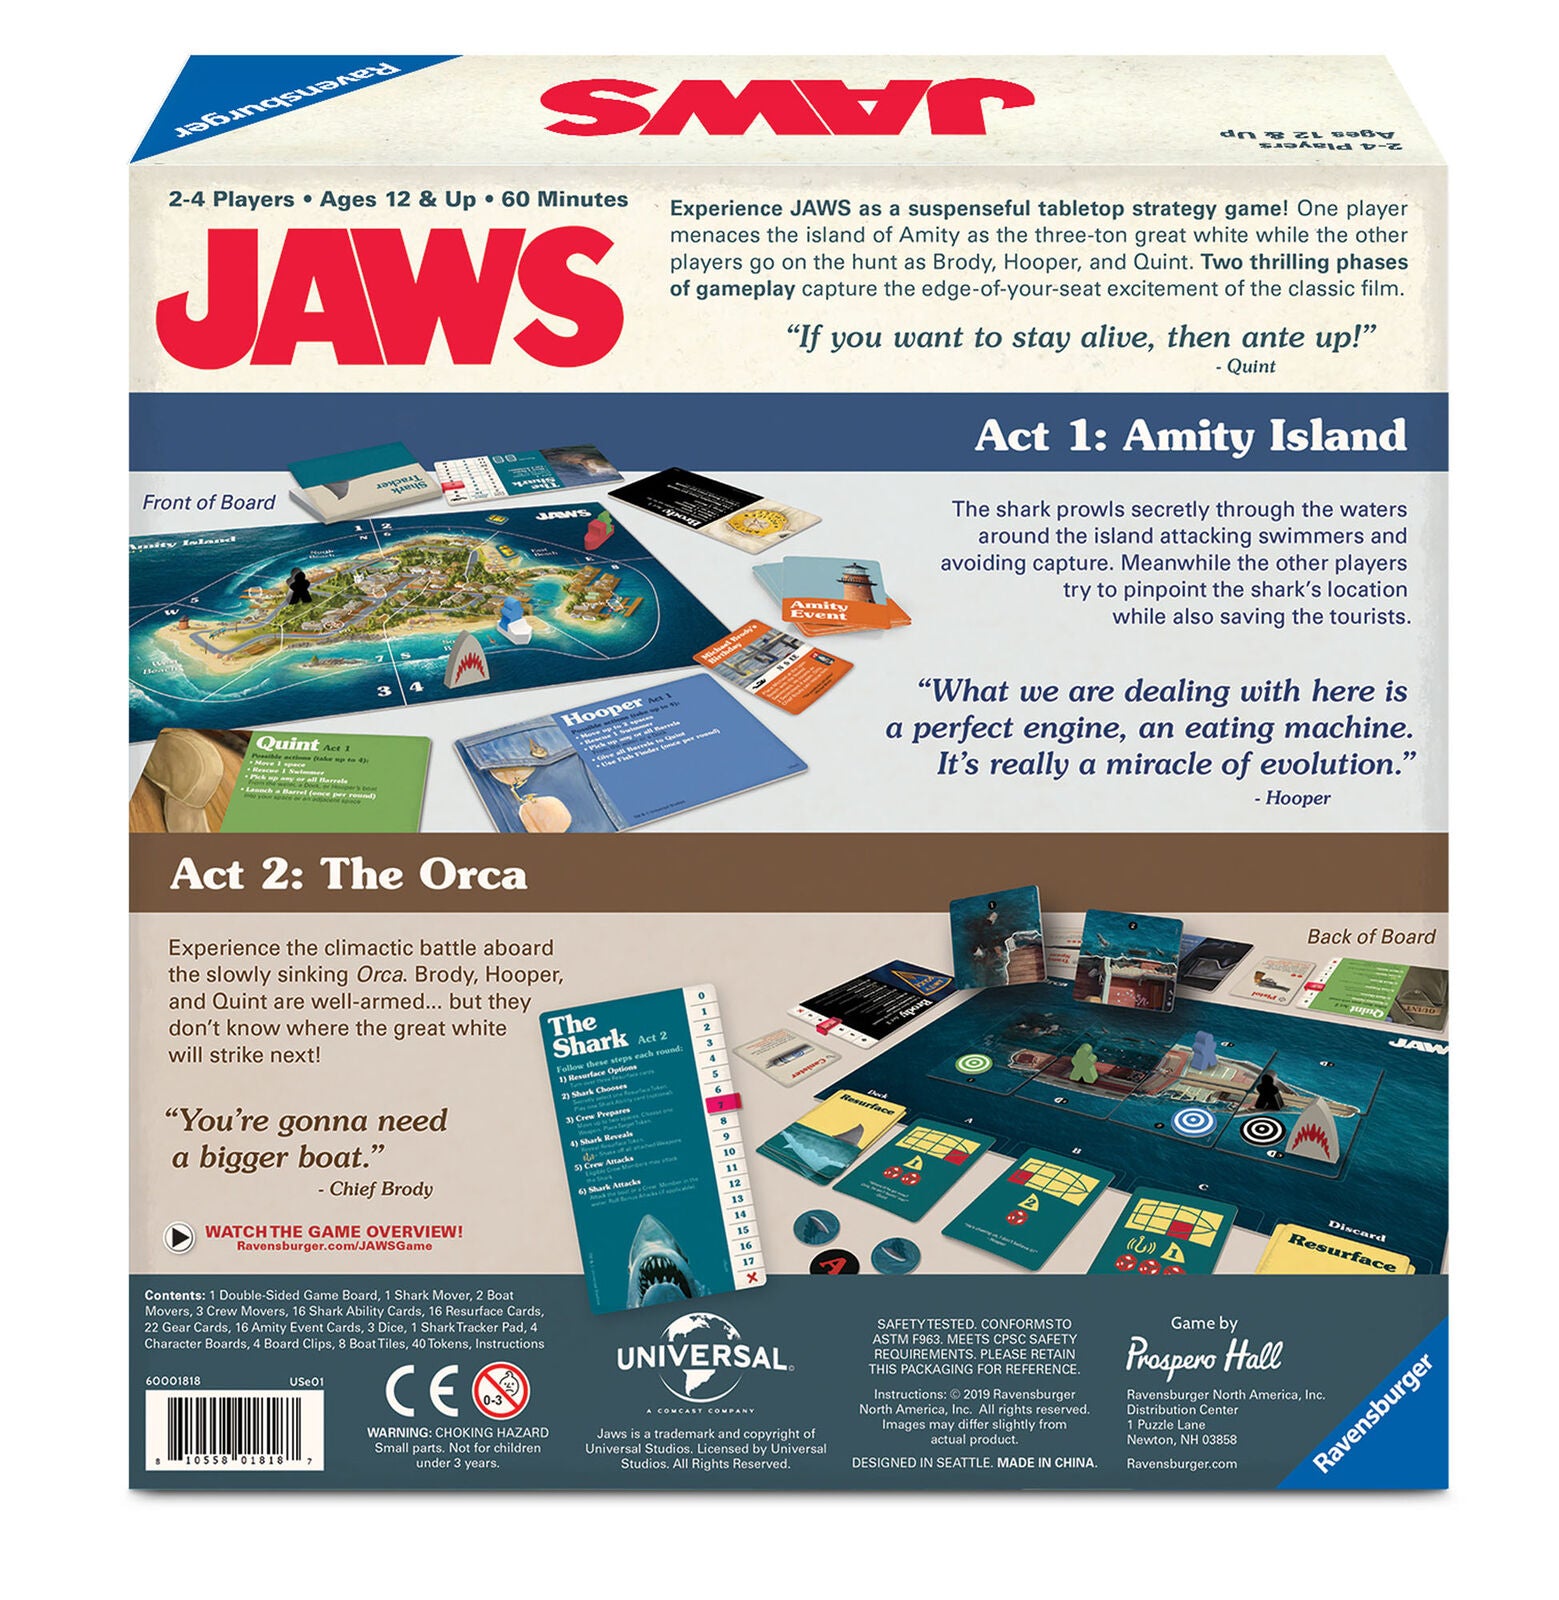 26289 Ravensburger Jaws - The Game Strategy & Suspense Game Suitable for Age 10+